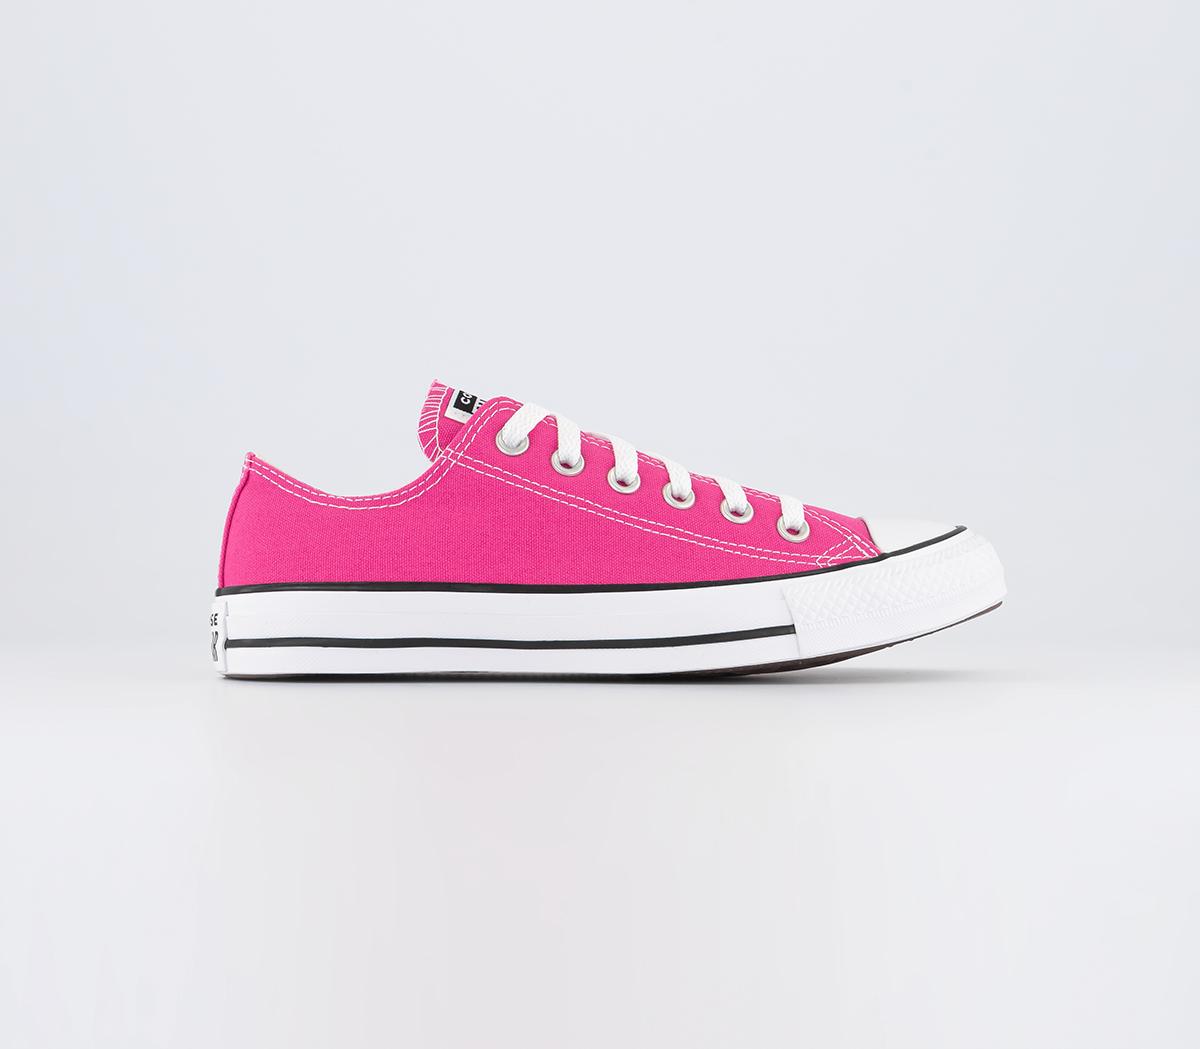 ConverseAll Star Low TrainersAstral Pink White Black